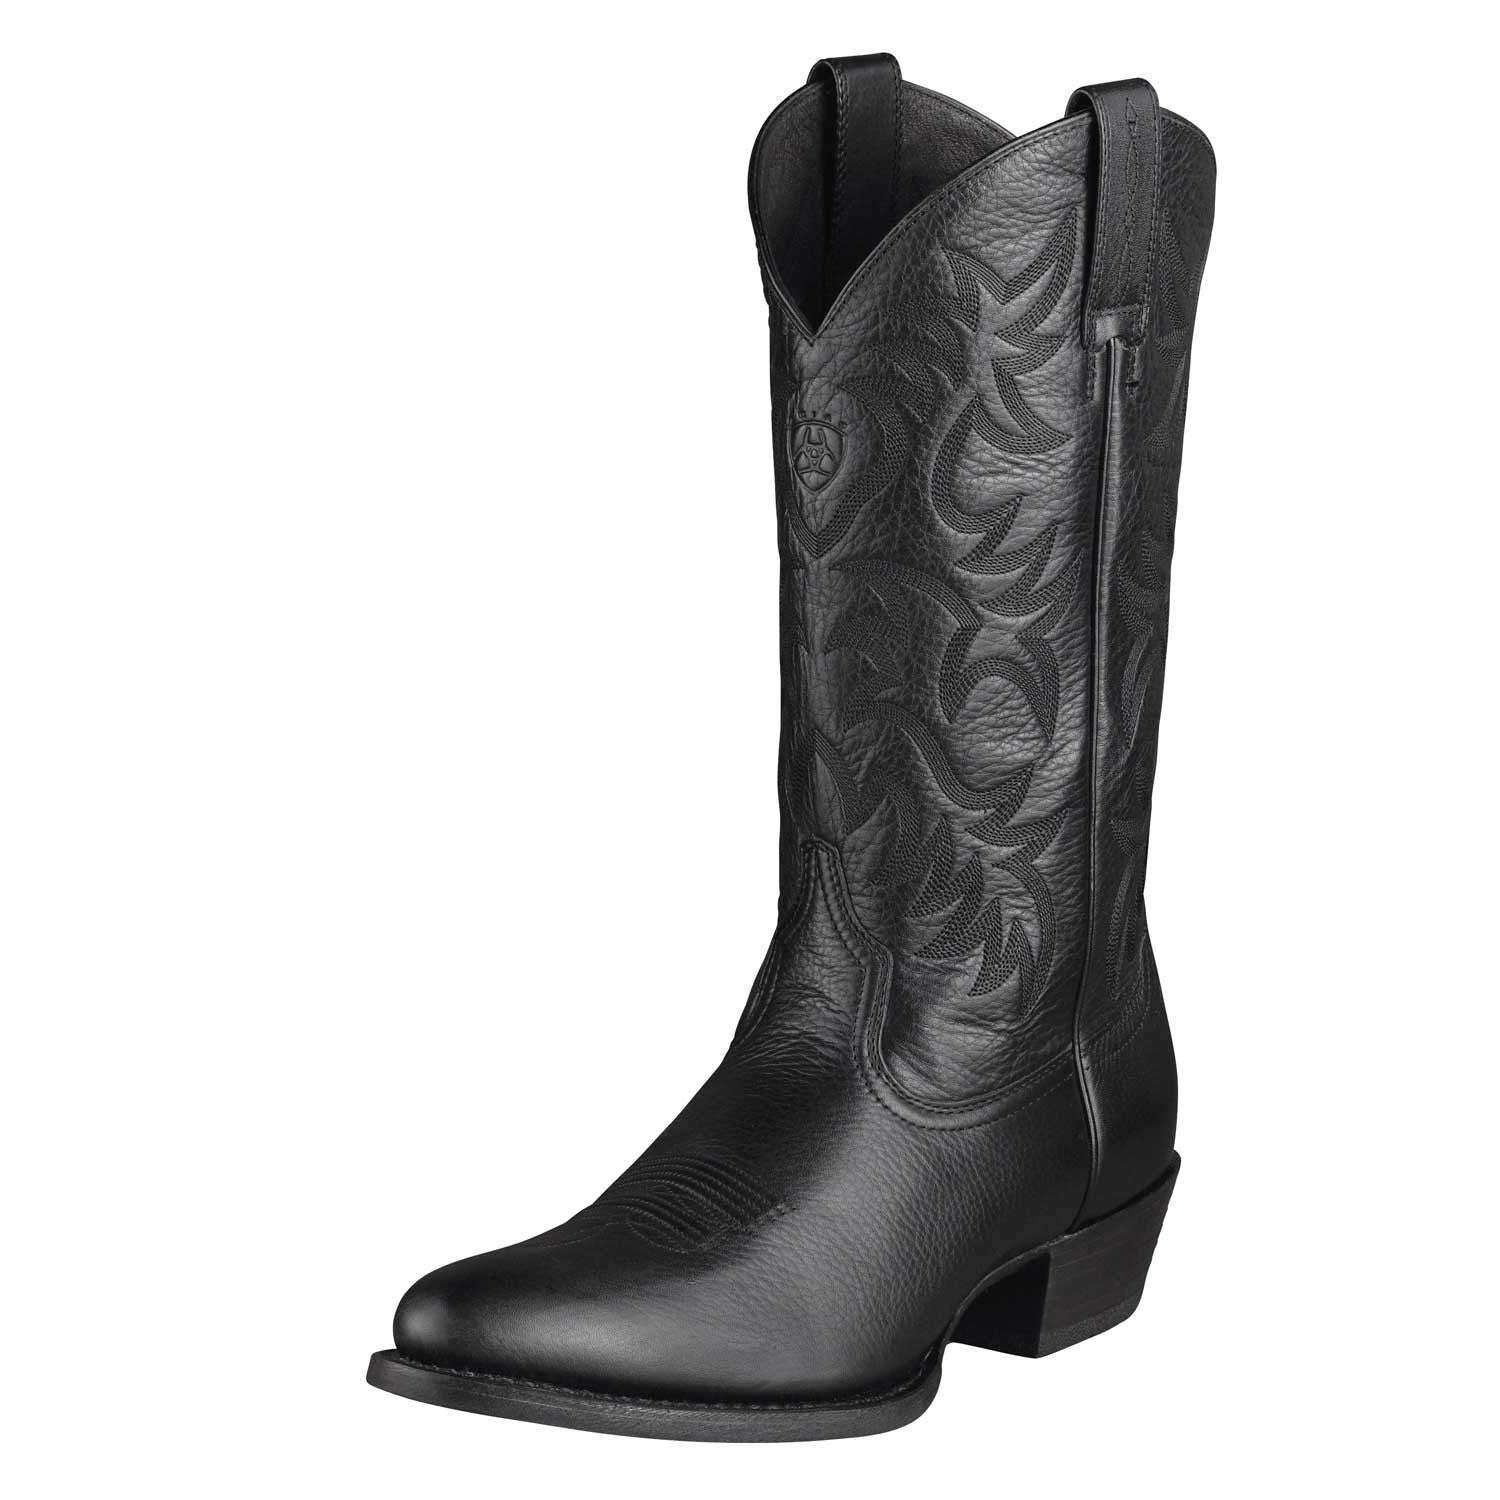 Ariat Heritage Western R Toe 10002218 Dress Cowboy Boots